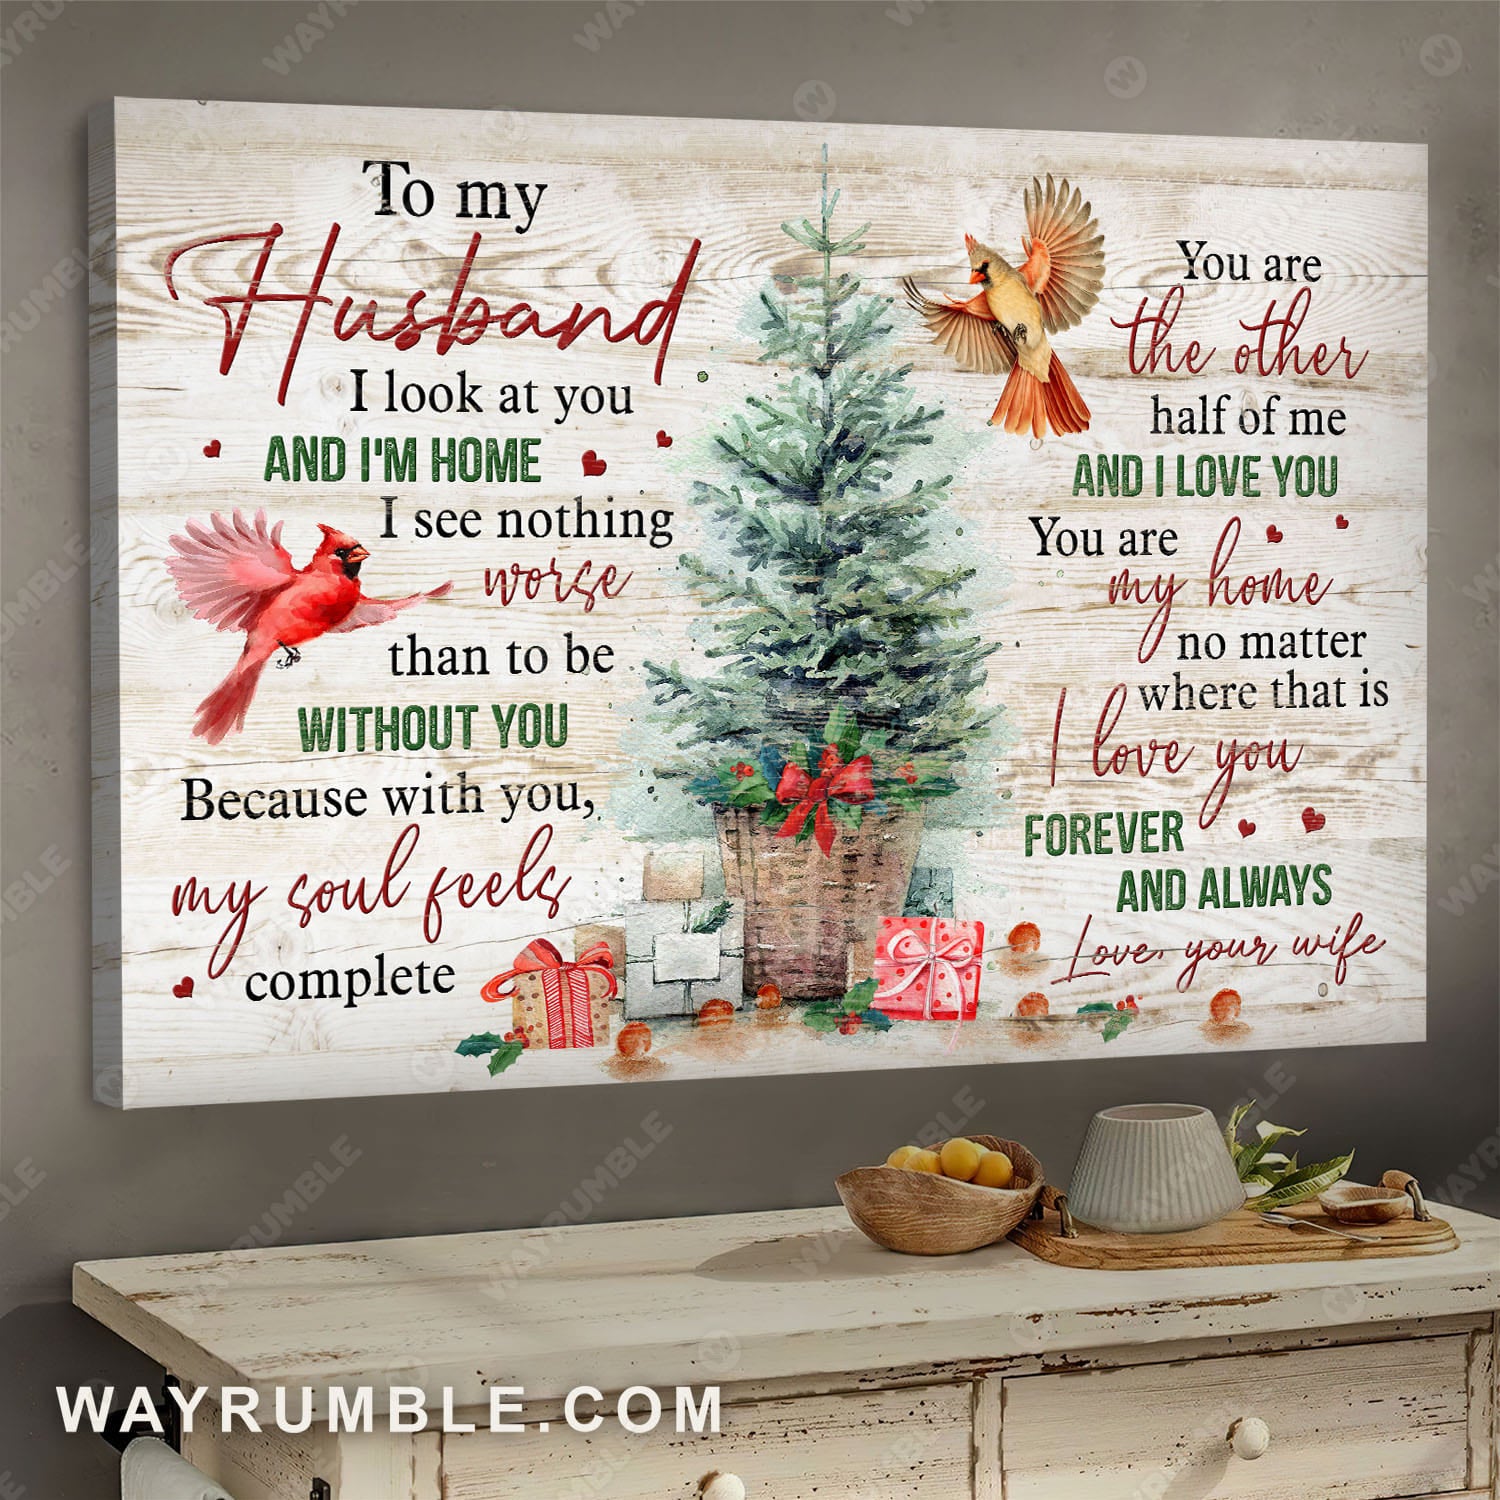 To my husband, Christmas tree, Cardinal painting, You are the other half of me - Couple Landscape Canvas Prints, Wall Art